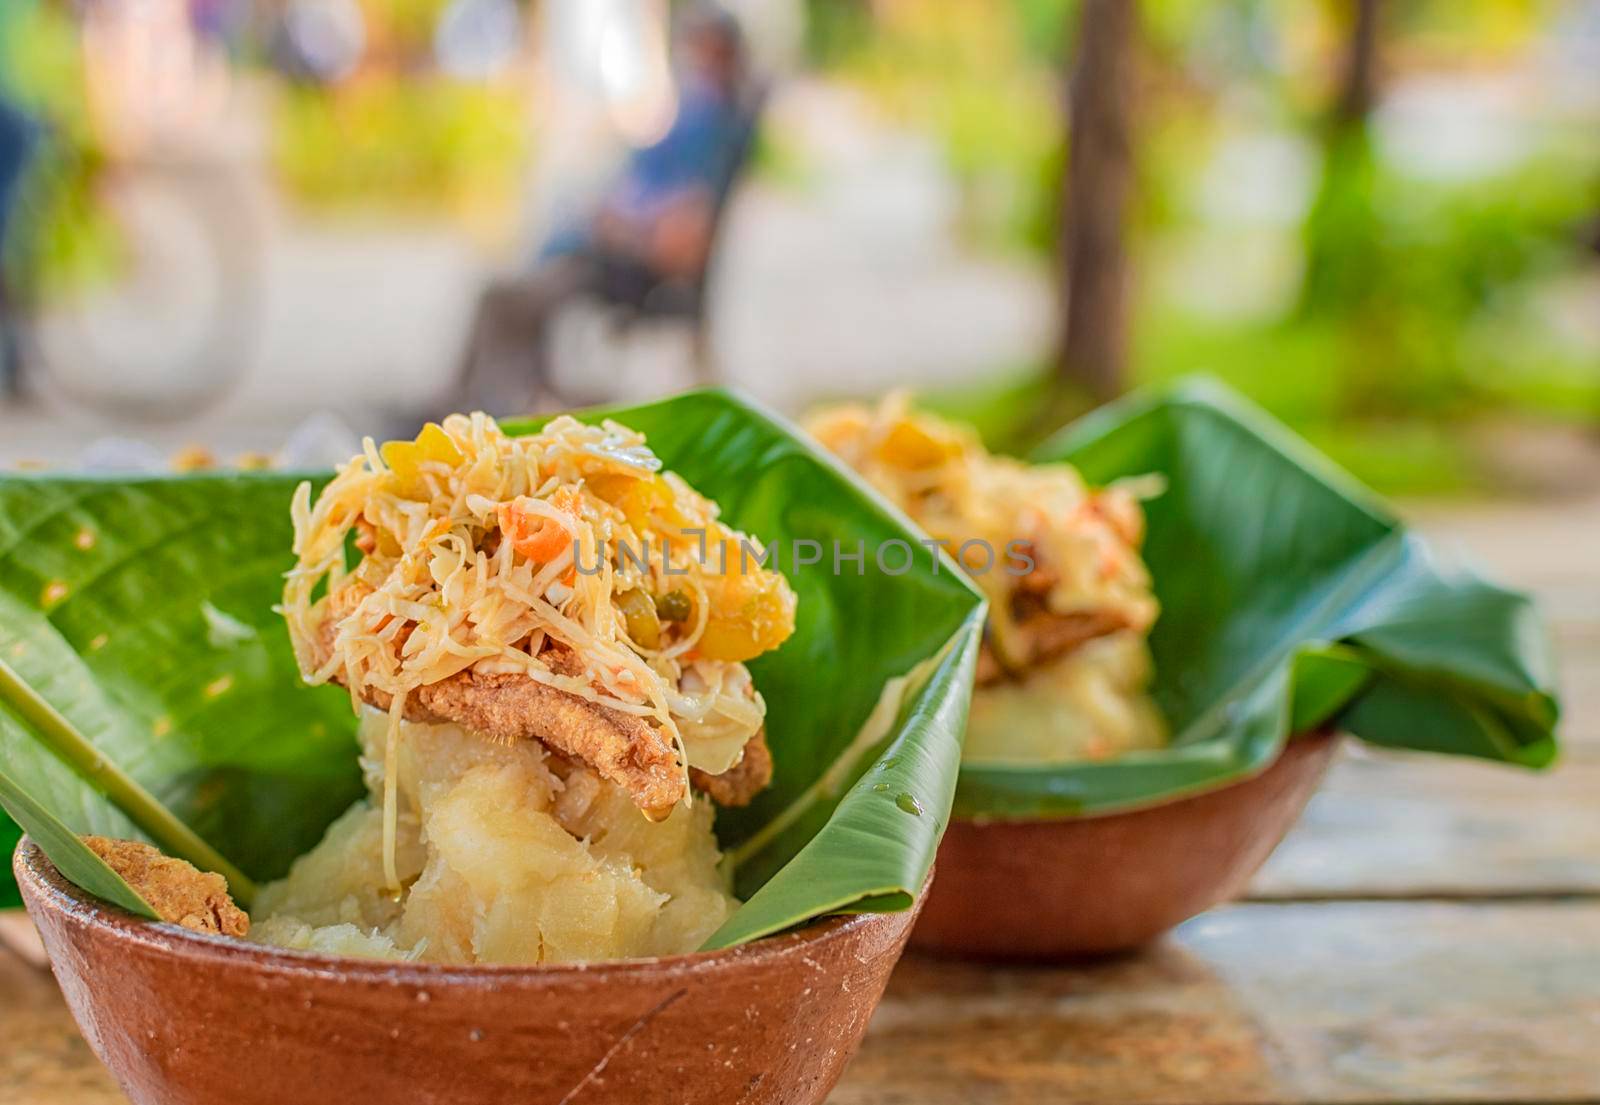 Vigorón with leaves served on a wooden table, two vigorones served on wooden background, vigorón typical food from nicaragua by isaiphoto